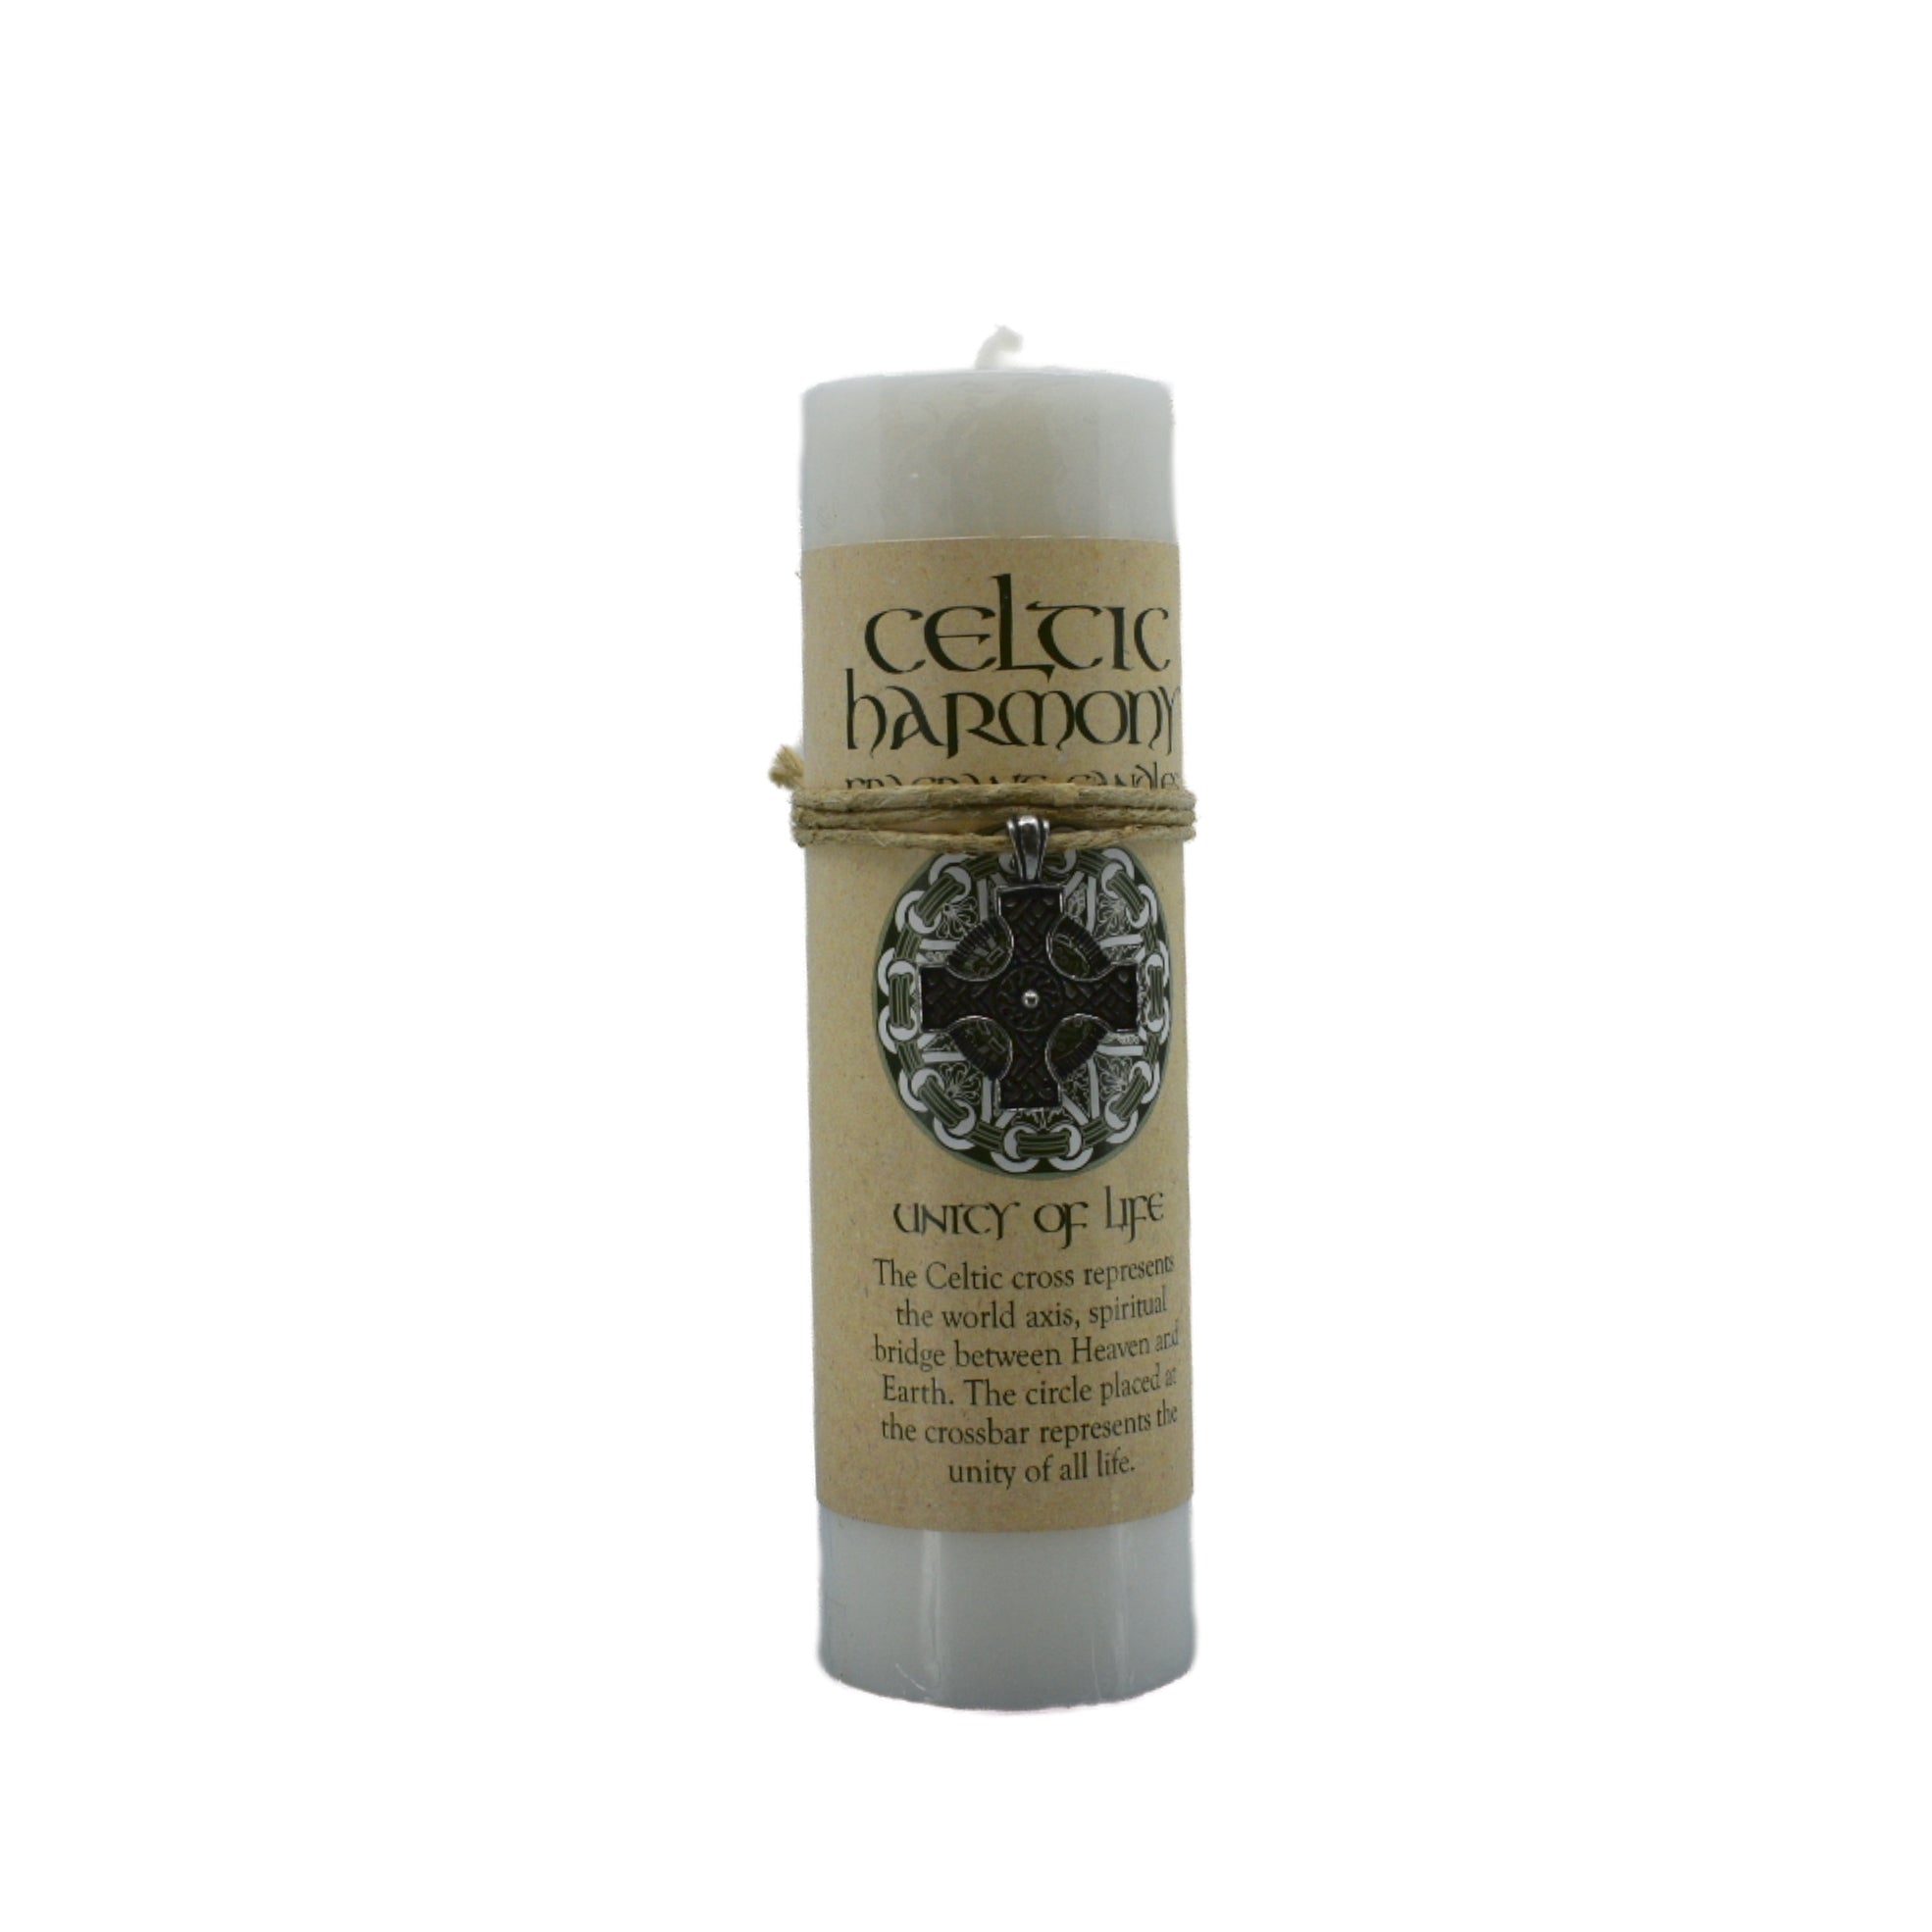 Unity of Life Celtic Pendant Candle.  It is part the Celtic Harmony series of candles.  The Celtic cross symbolizes the path between physical plane and the heavenly abode.  it is a scented white candle with a pewter pendant attached that can be worn as a necklace or used an an amulet.  